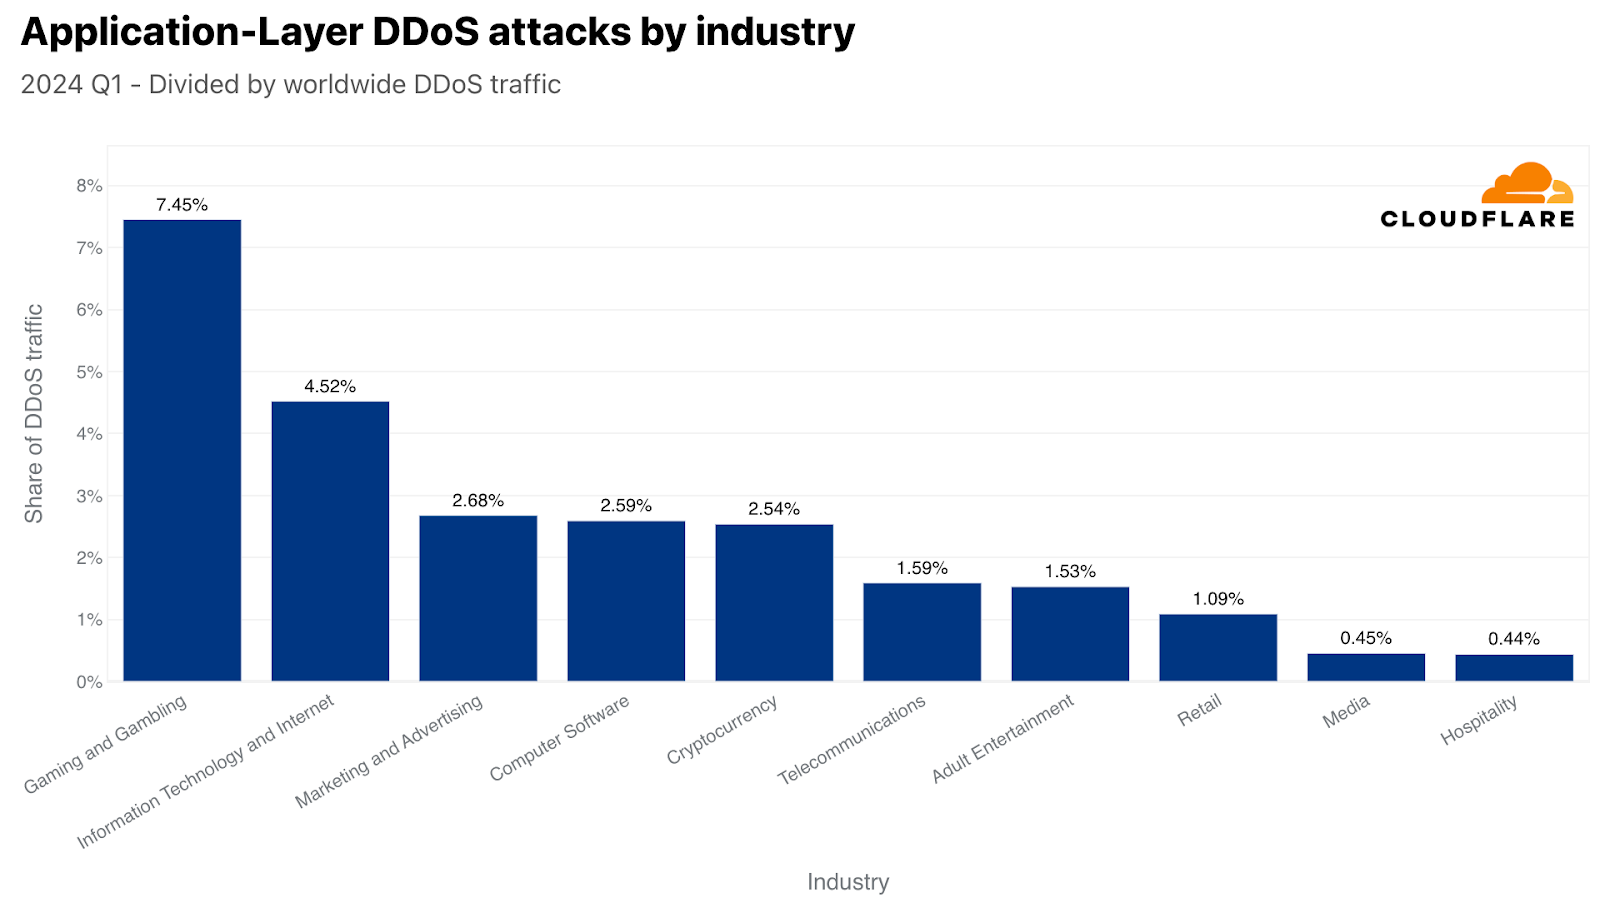 Top attacked industries by HTTP DDoS attacks